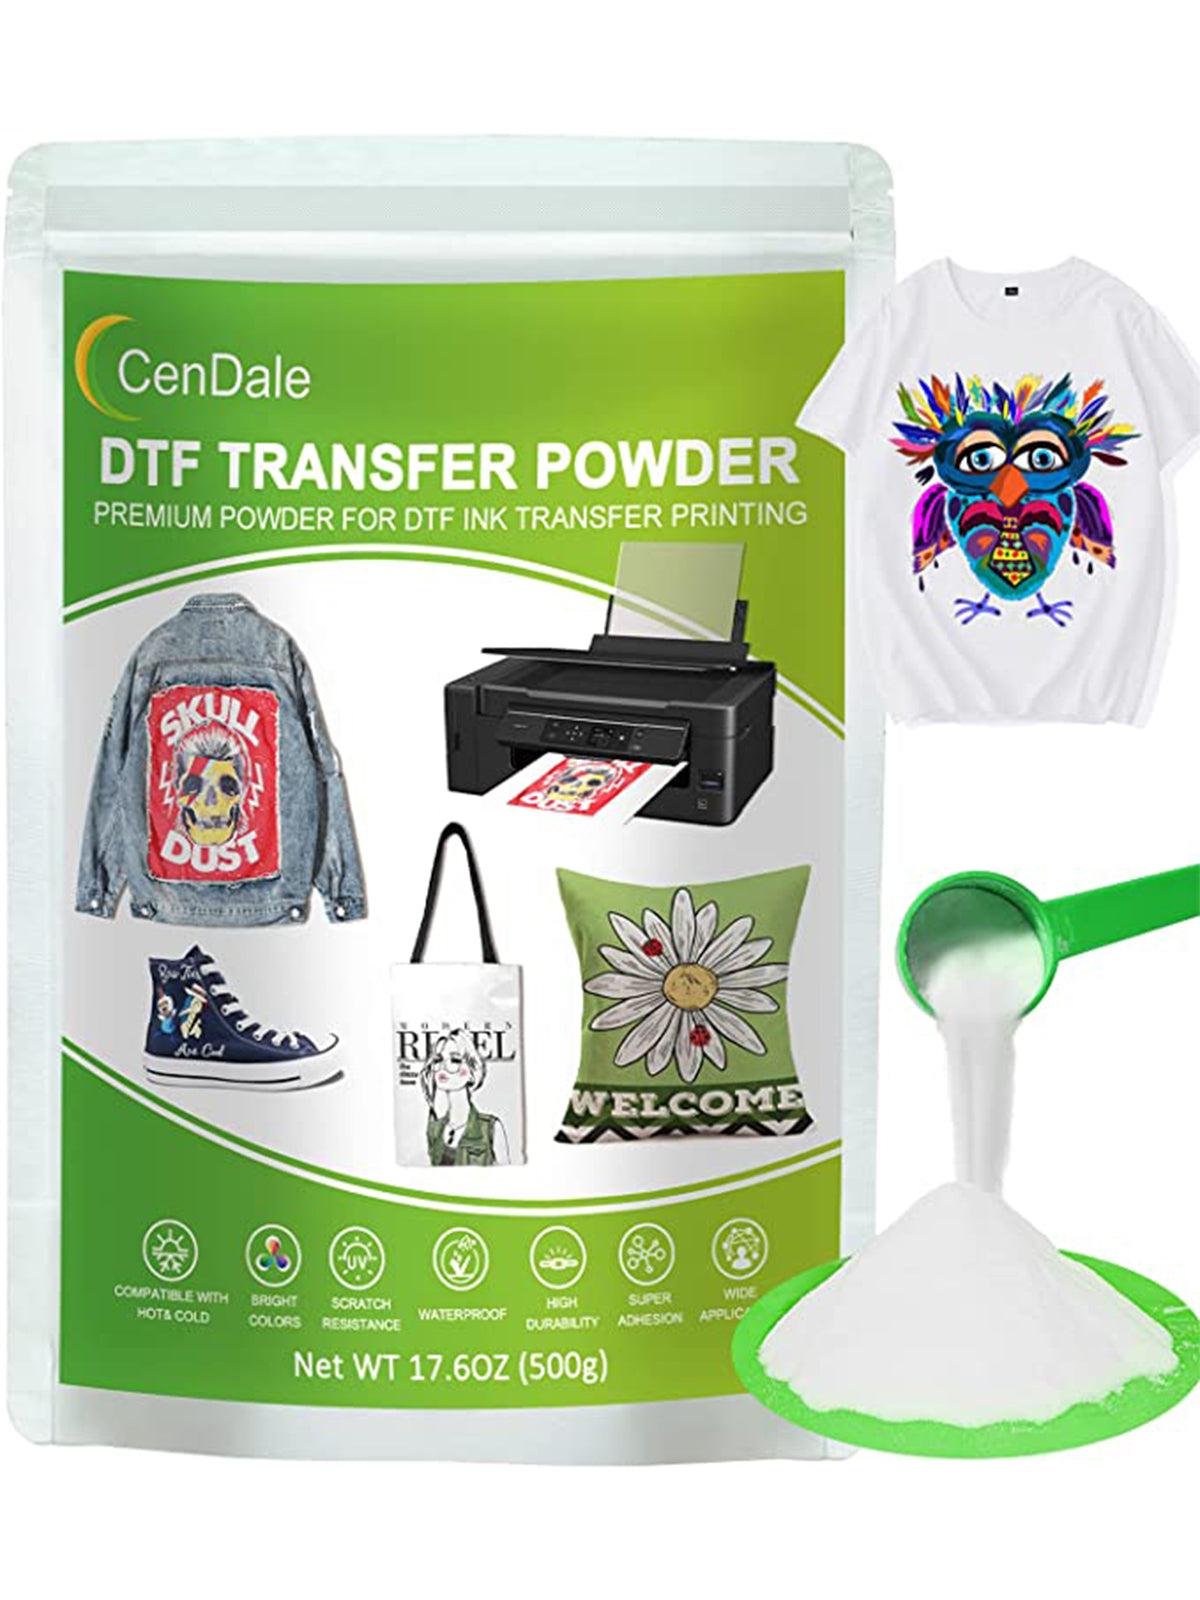 NGOODIEZ DTF Powder Digital Transfer - Hot Melt Adhesive, DTF Pretreat  Transfer Powder for Direct Printing on Any Colored/White Fabric, Adhesive